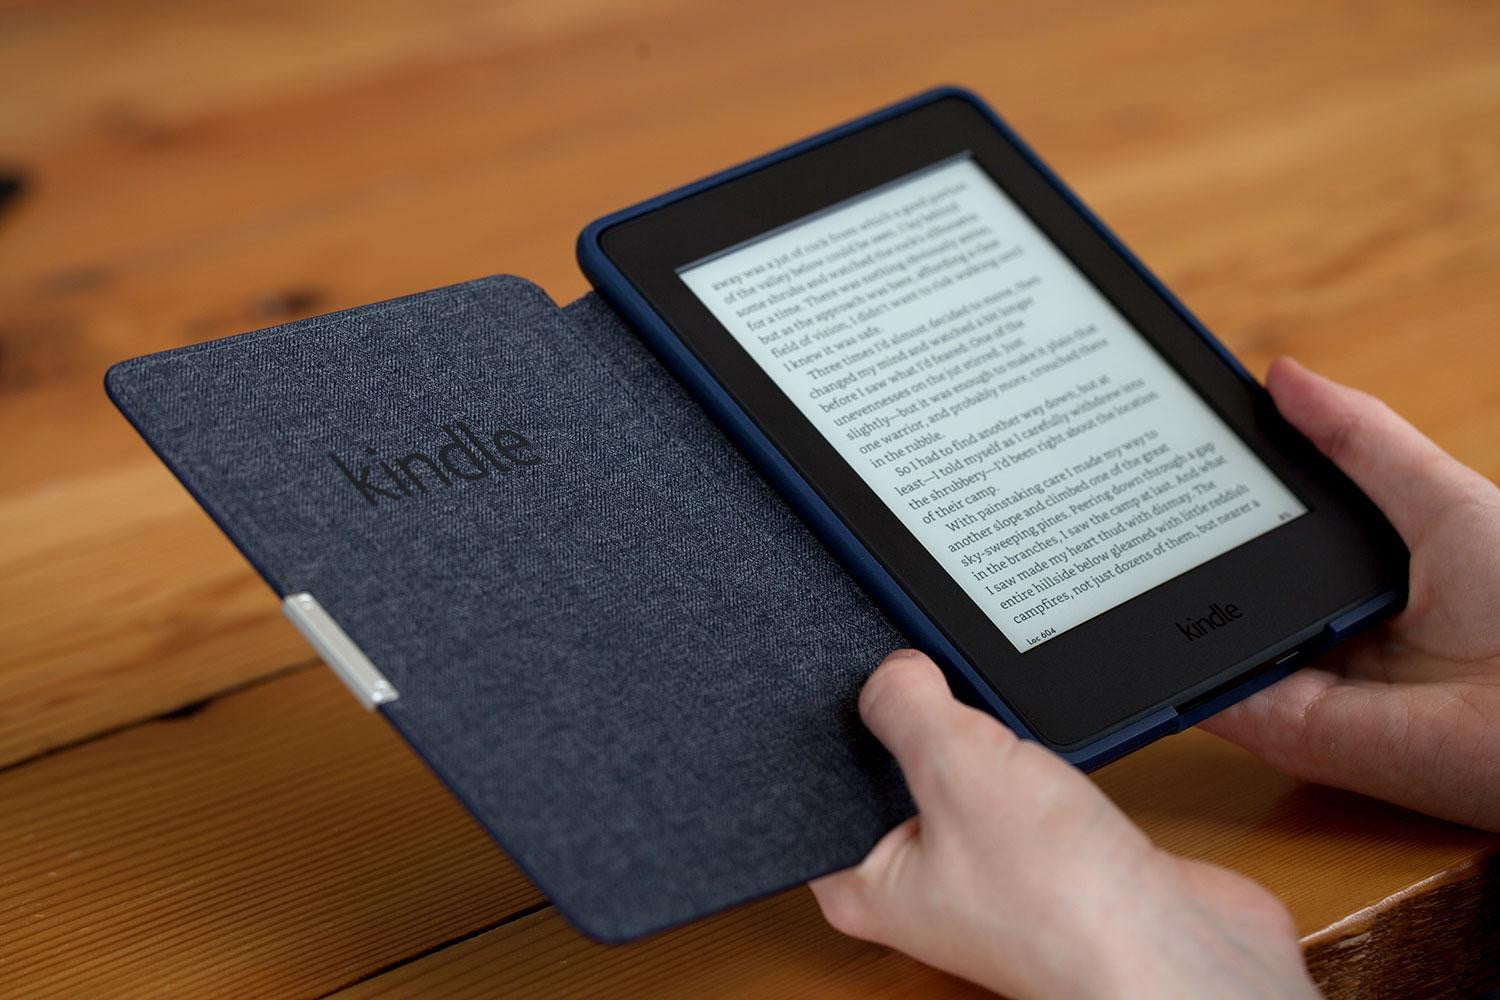 https://www.digitaltrends.com/wp-content/uploads/2017/09/amazon-kindle-paperwhite-2015-in-hand-1500x1000.jpg?fit=720%2C480&p=1